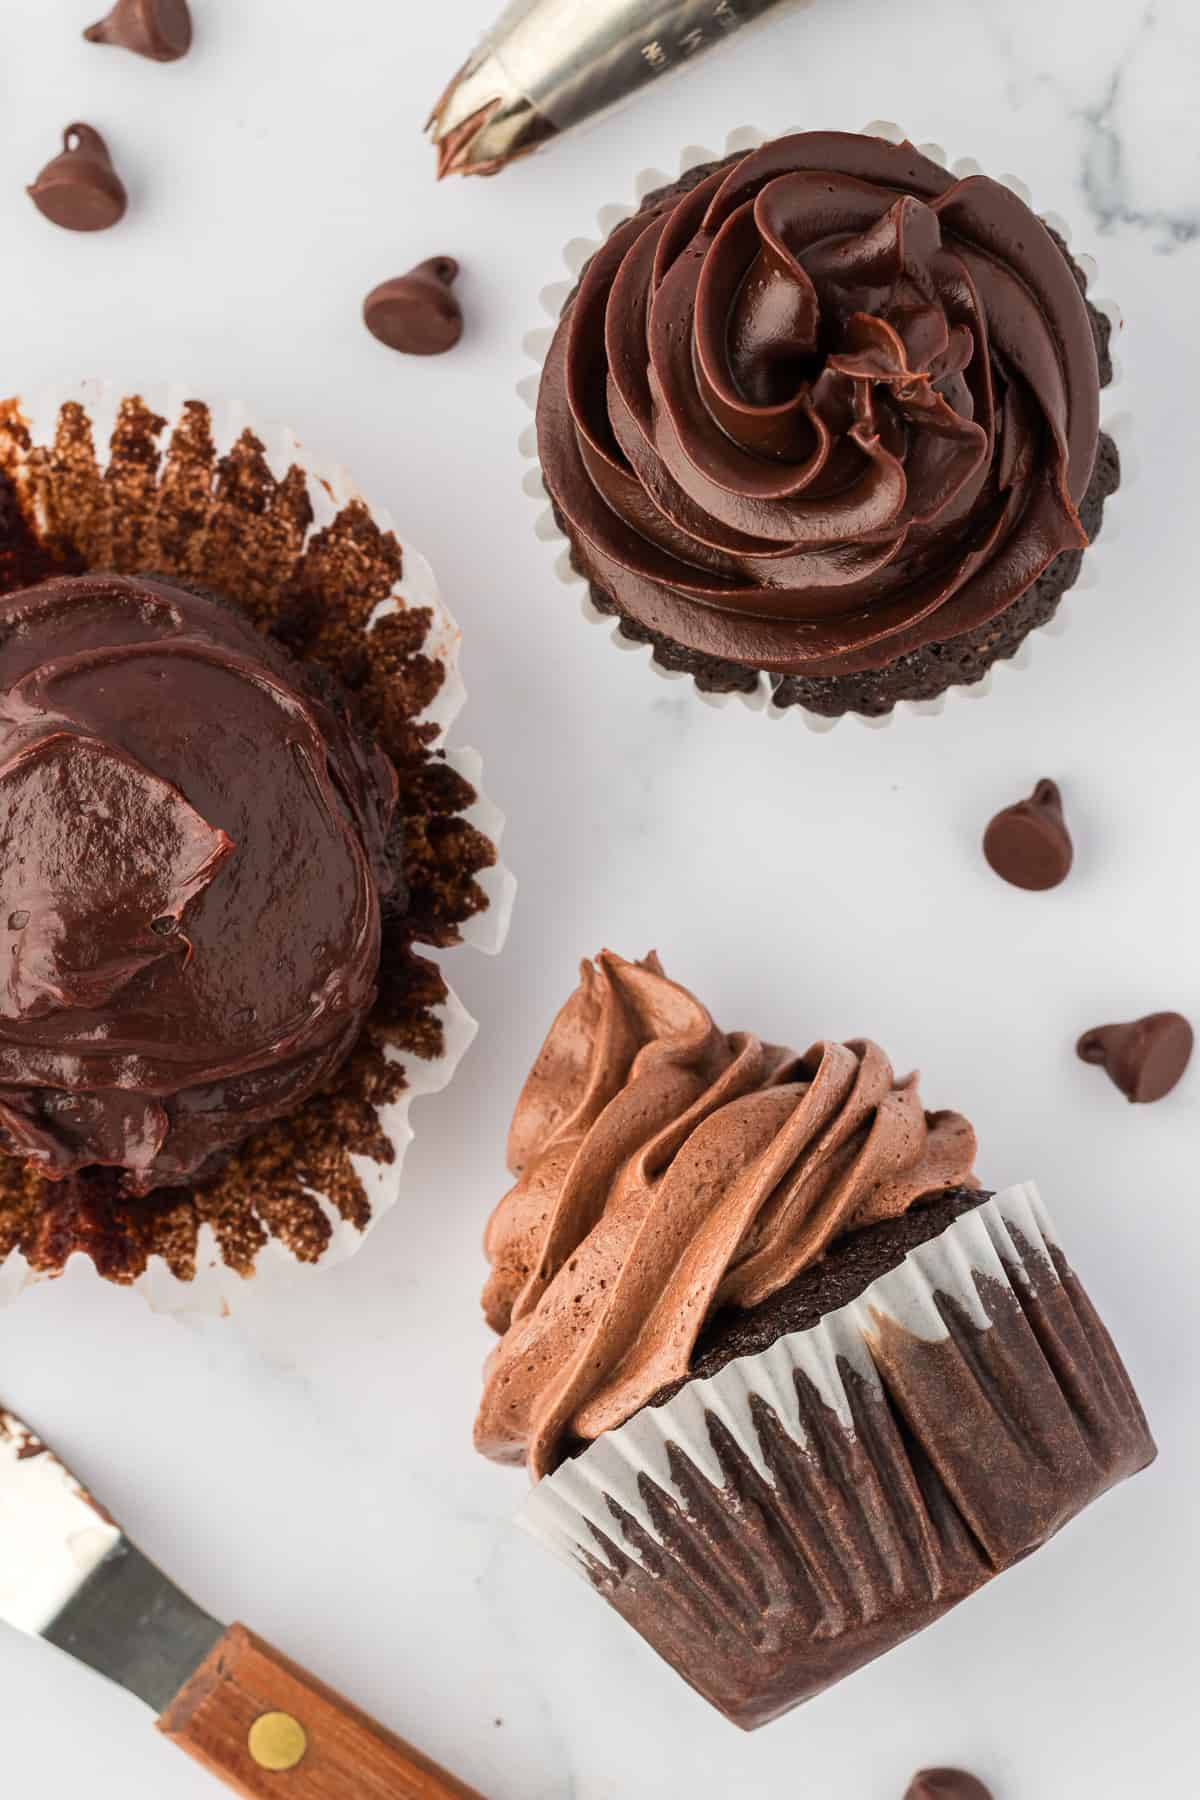 three chocolate cupcakes with chocolate chips sprinkled around. The one with regular ganache with its paper liner peeled partially off, the piped ganache cupcake sitting in a paper liner and the cupcake with whipped ganache laying on its side